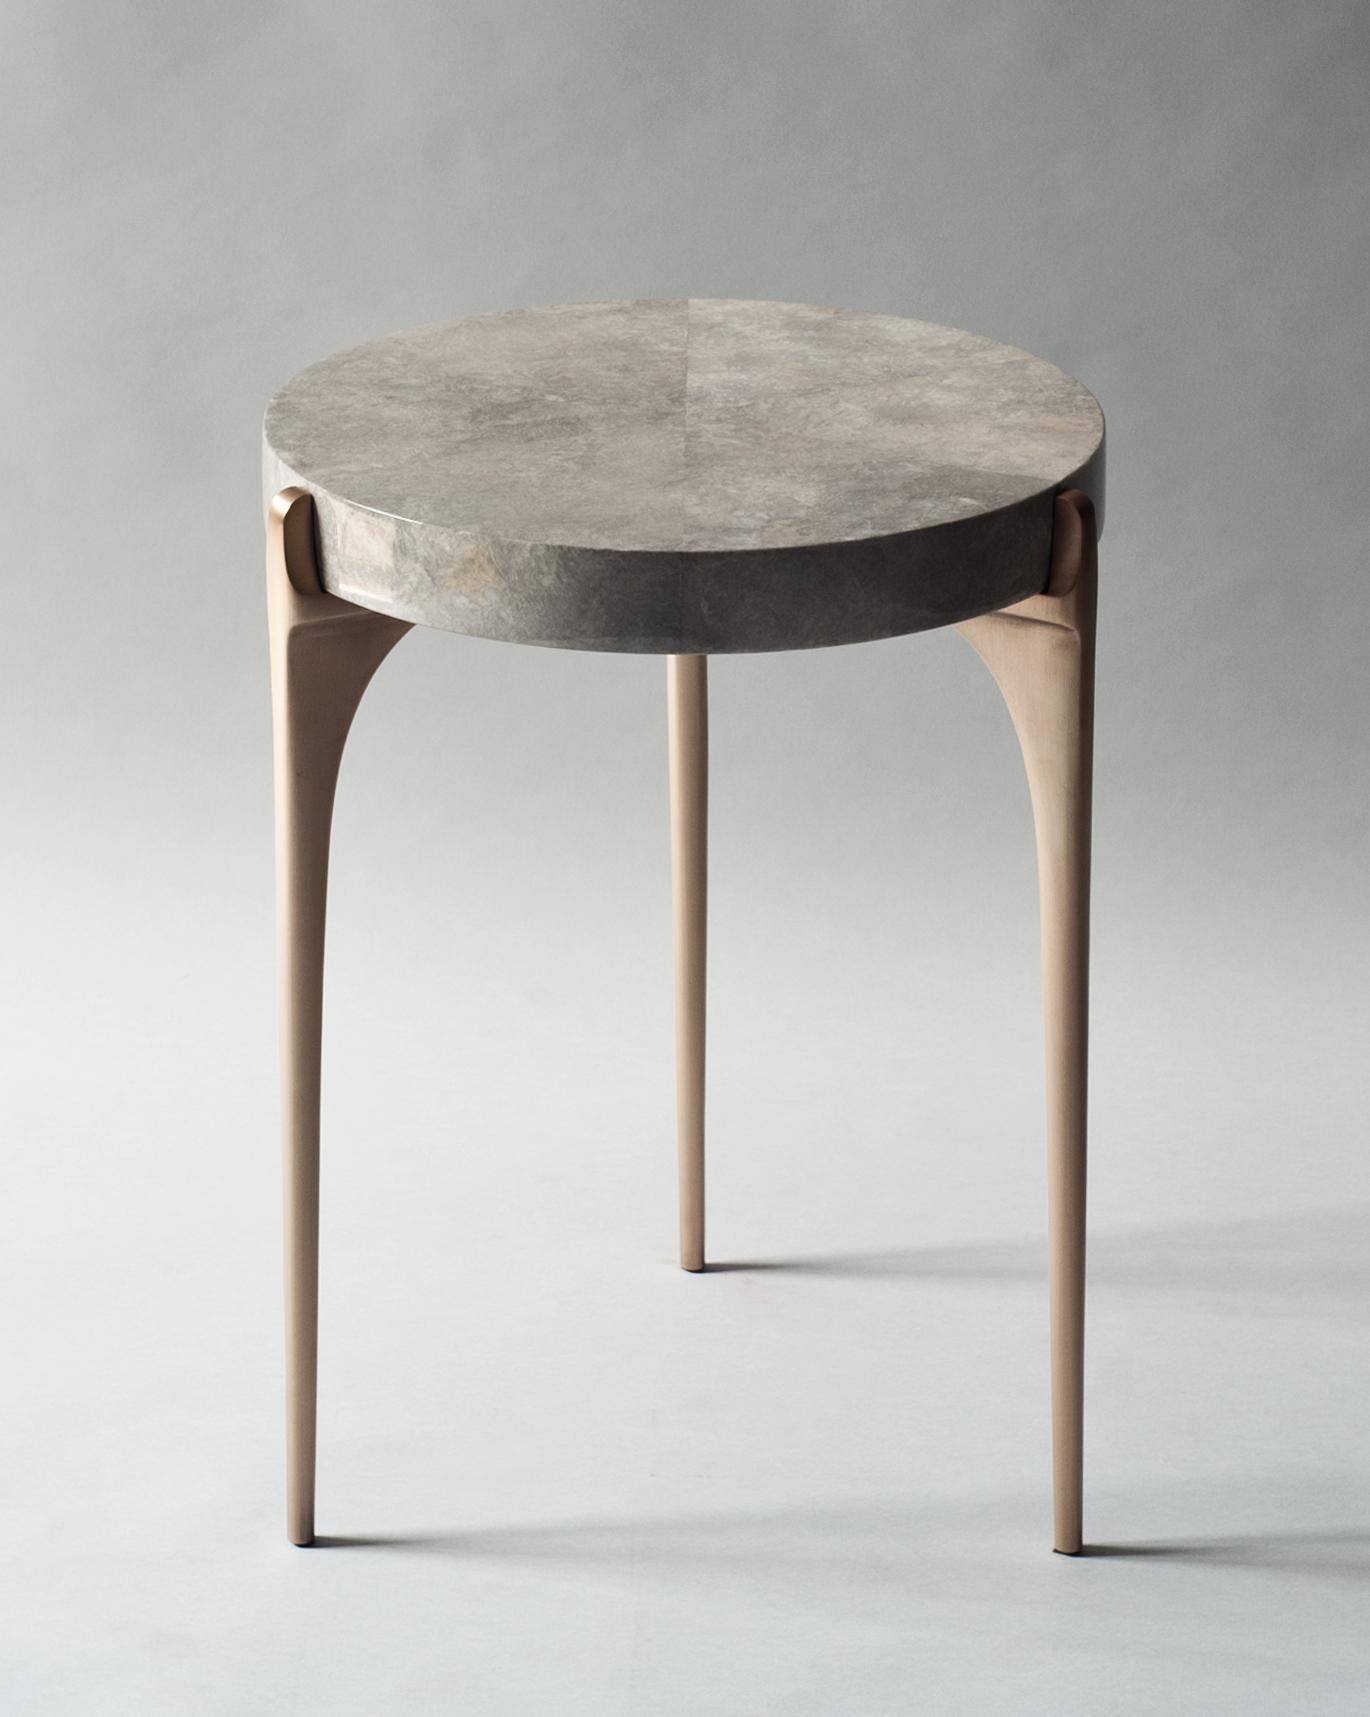 Acantha side table by DeMuro Das
Dimensions: 41.5 x 54.5 cm
Materials: Carta (Grey), glossy
Solid bronze, satin legs

Dimensions and finishes can be customized.

DeMuro Das is an international design firm and the aesthetic and cultural